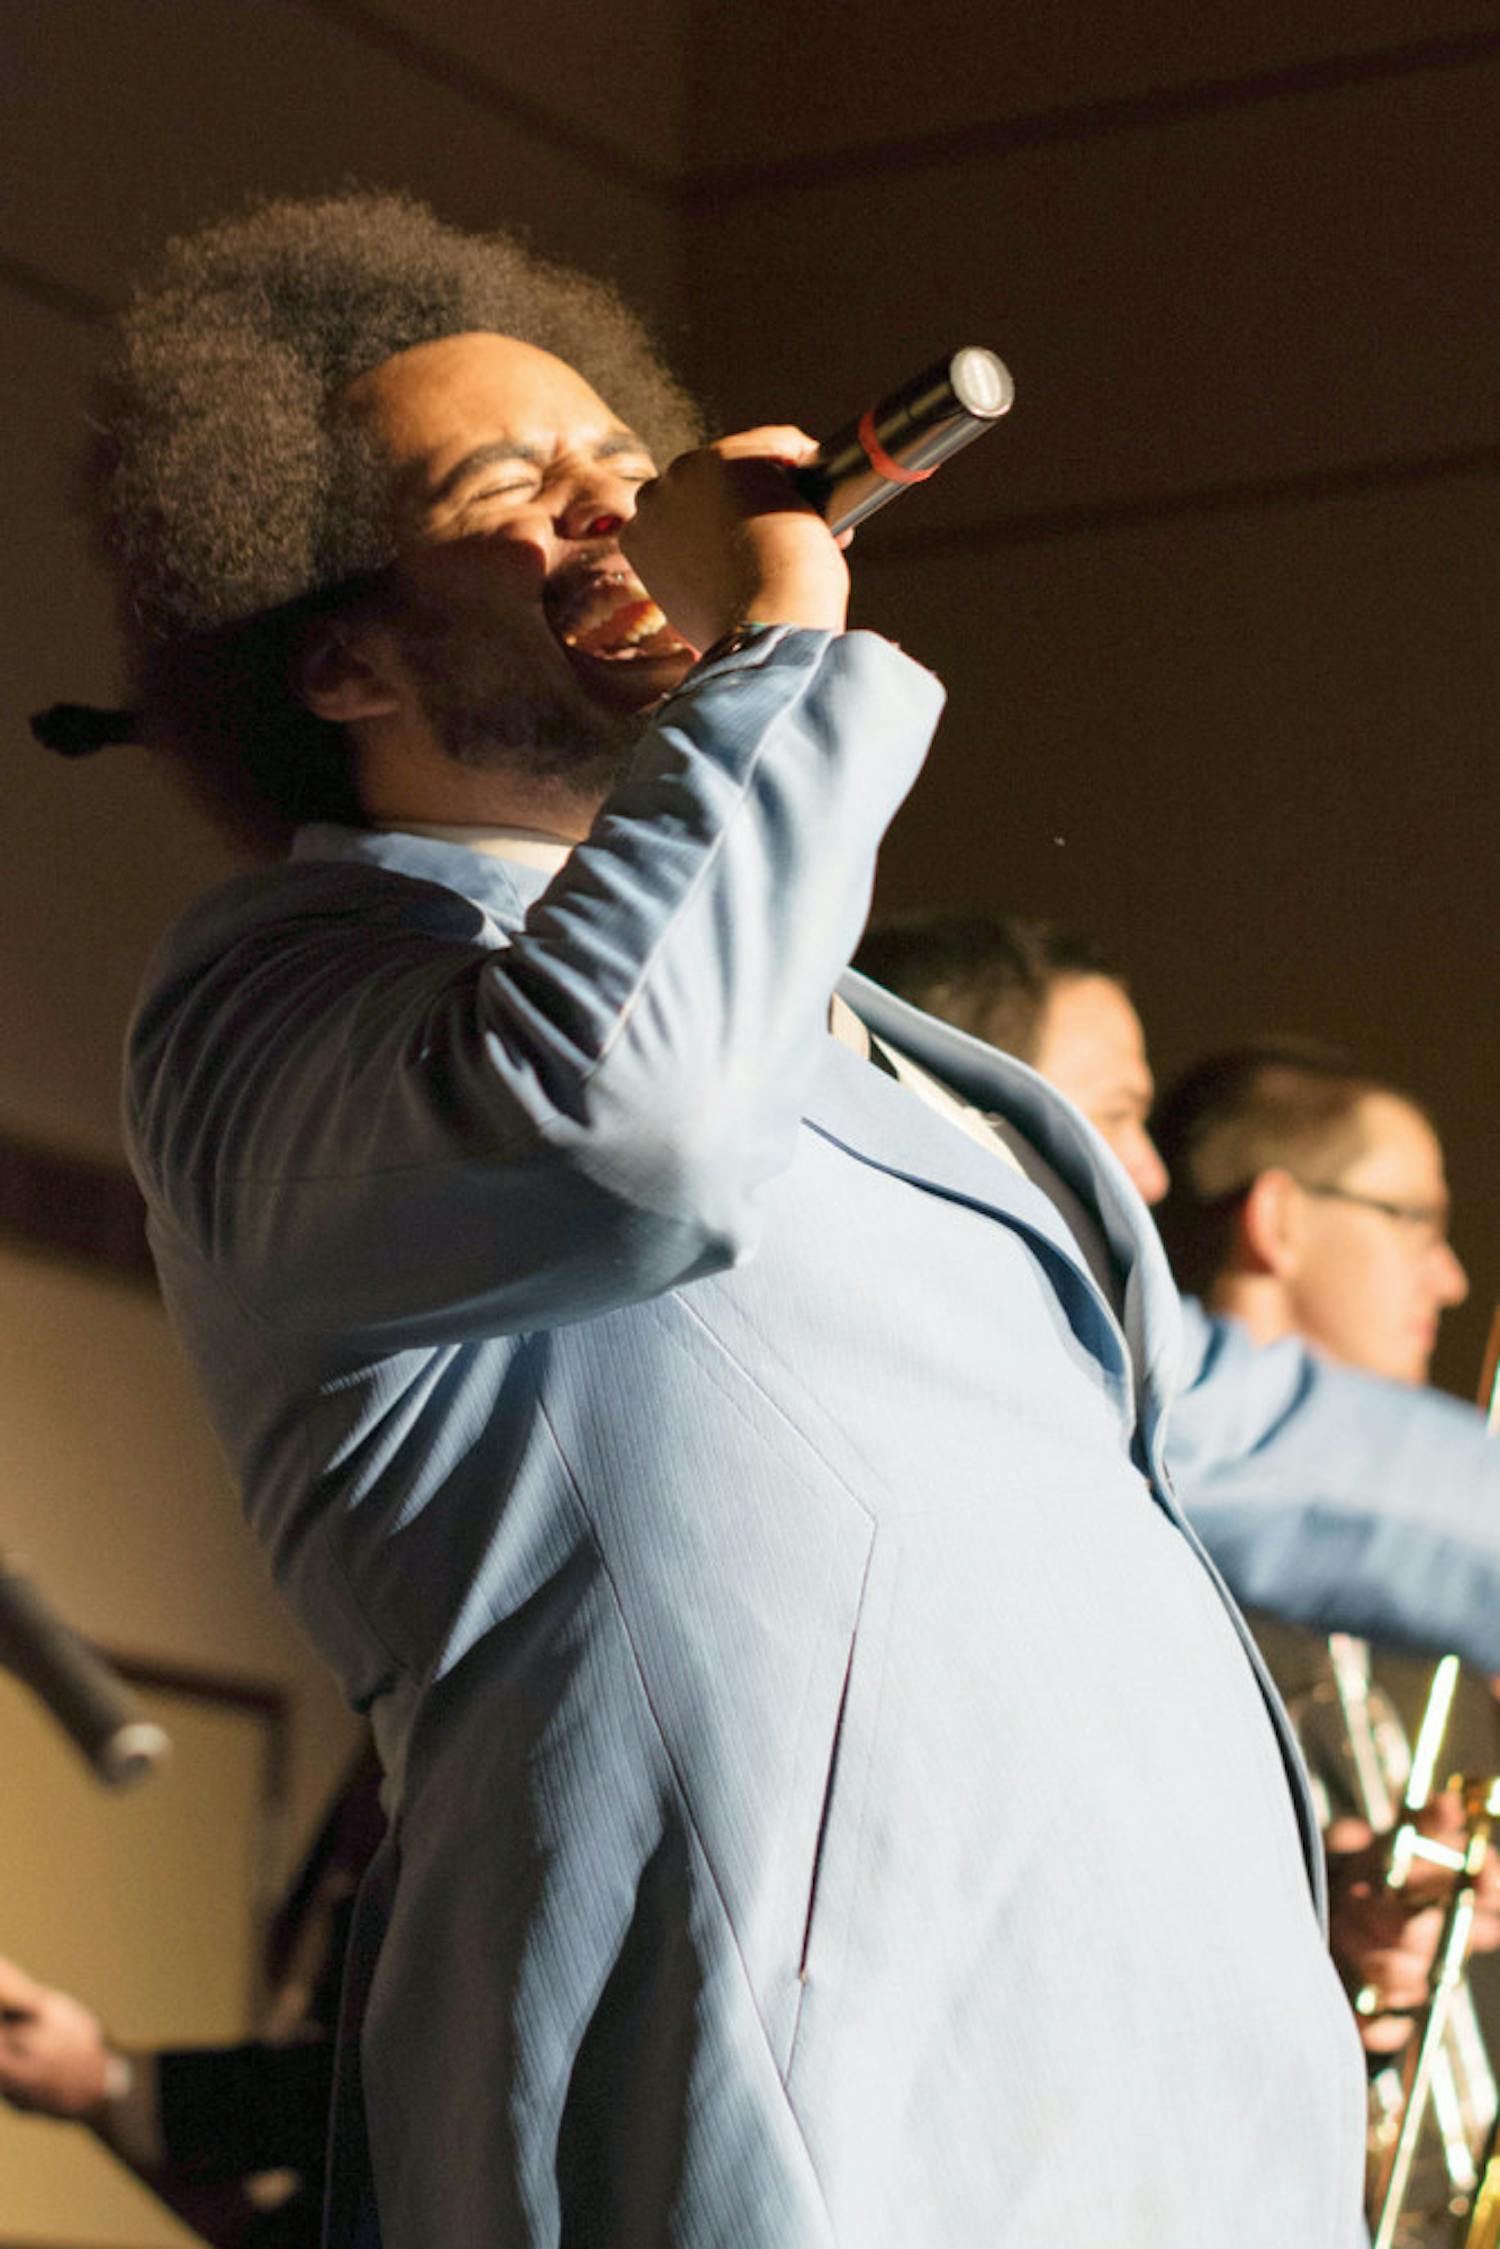 Justin McKenzie, the 25-year-old lead male singer, sings with his band The Savants of Soul in the Reitz Union Grand Ballroom on Tuesday night. The Savants of Soul are a 10-member local band that plays soul music.